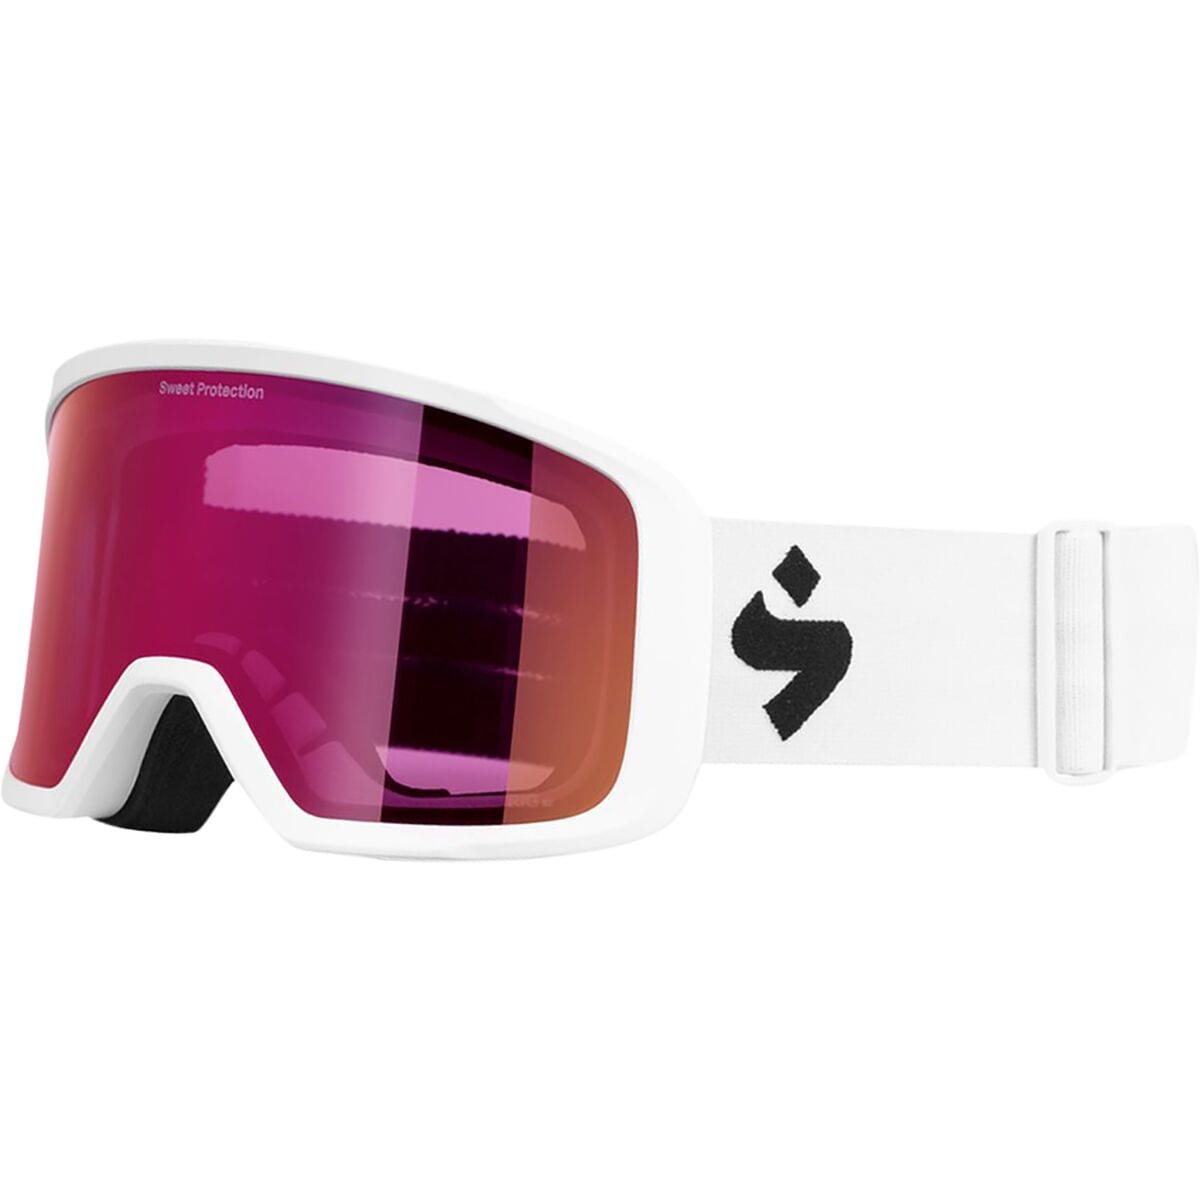 Sweet Protection Firewall RIG Reflect Goggles | eBay